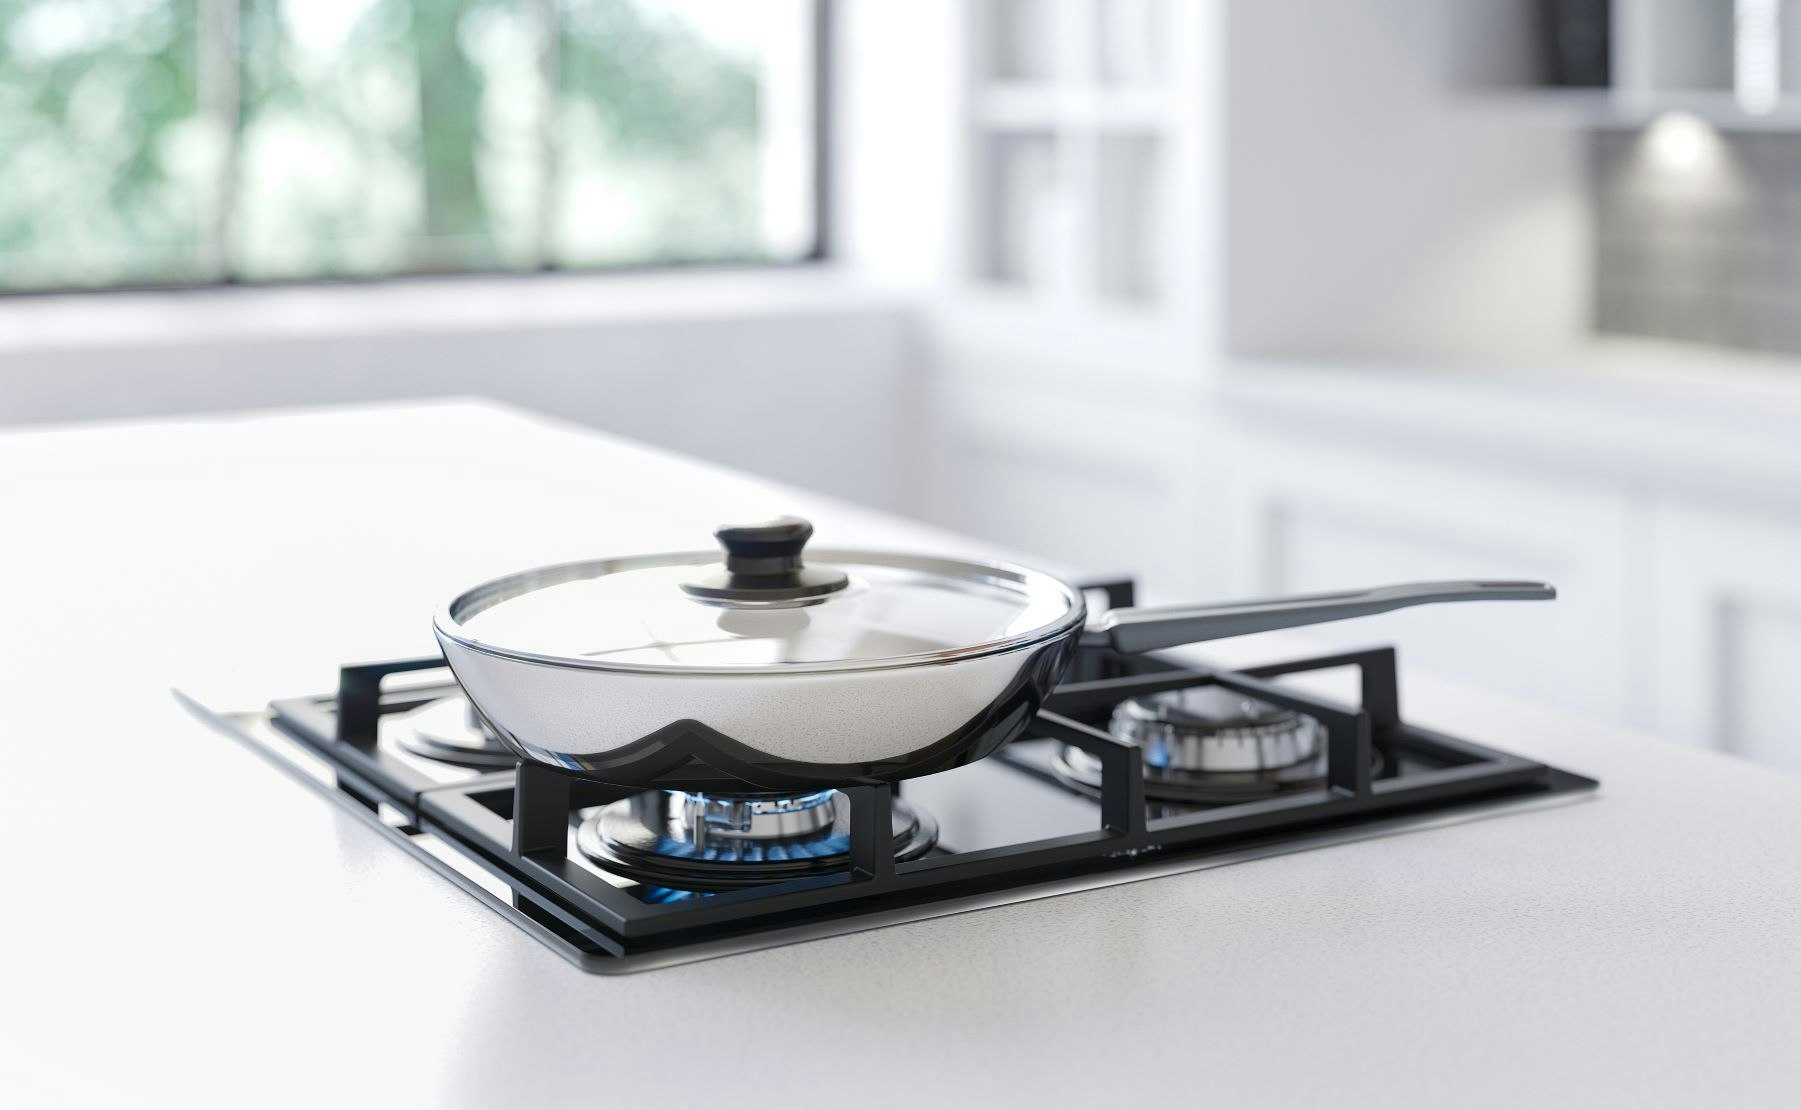 Frying Pan on Gas Stove small